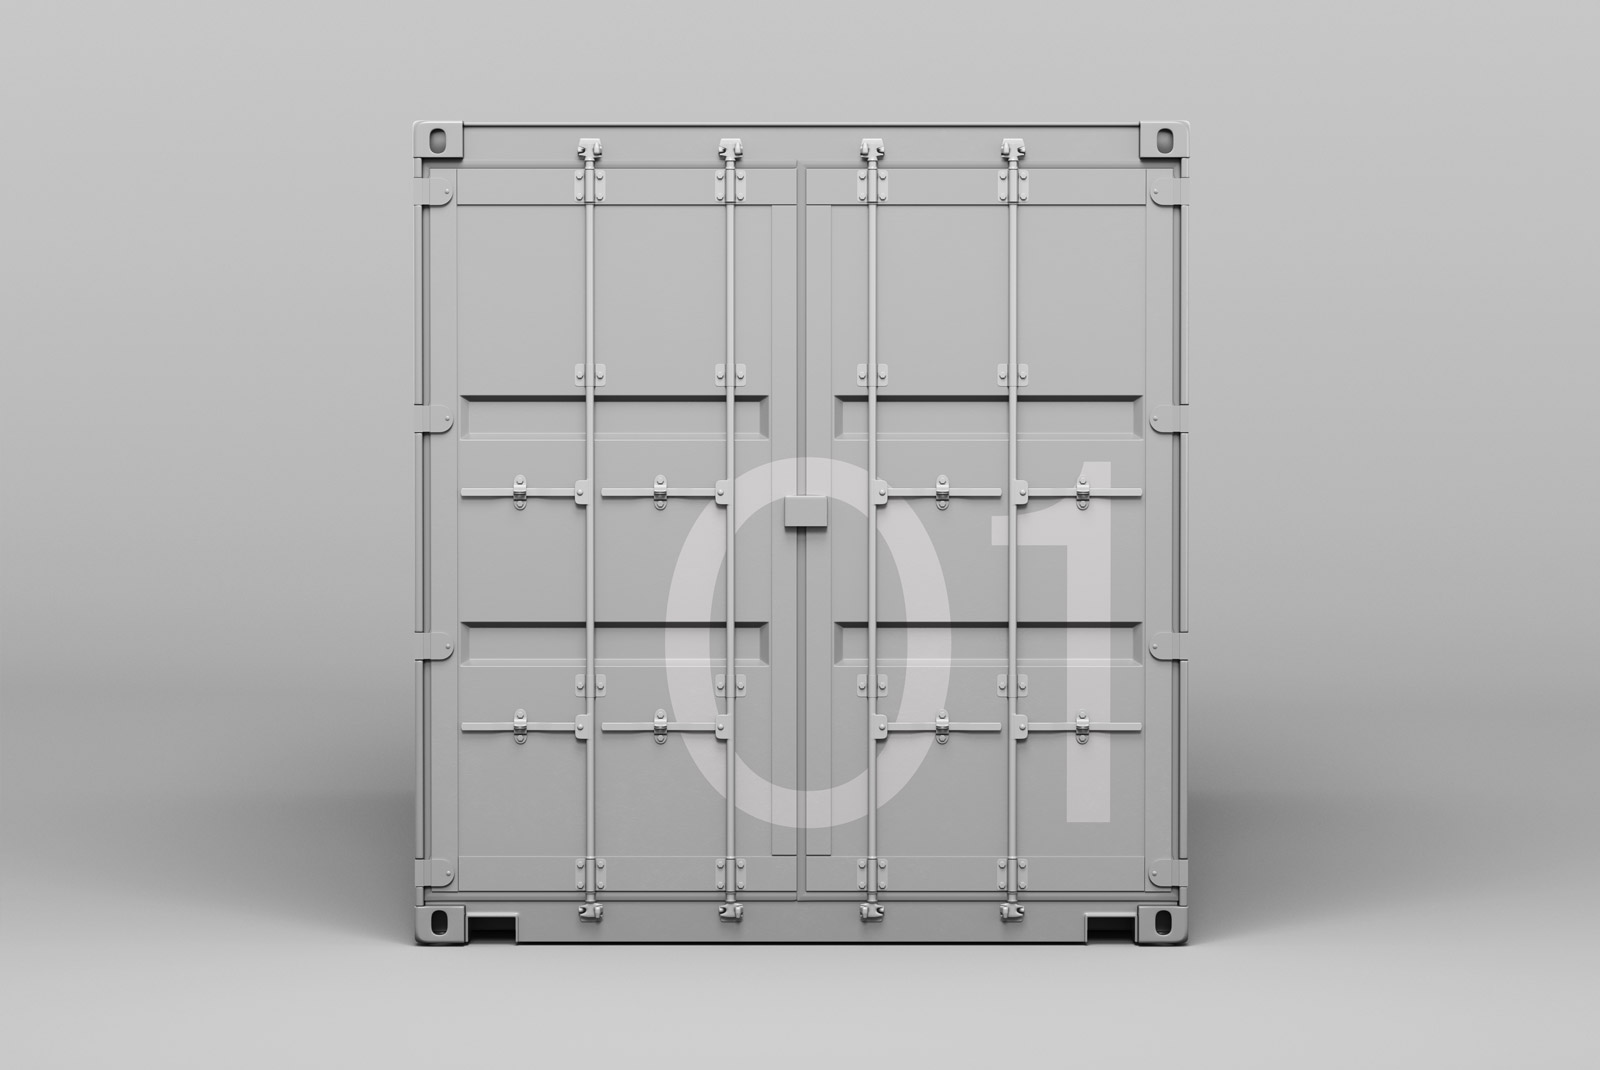 Realistic 3D model of a shipping container for mockups, showcasing product packaging and storage designs, isolated on a plain background.